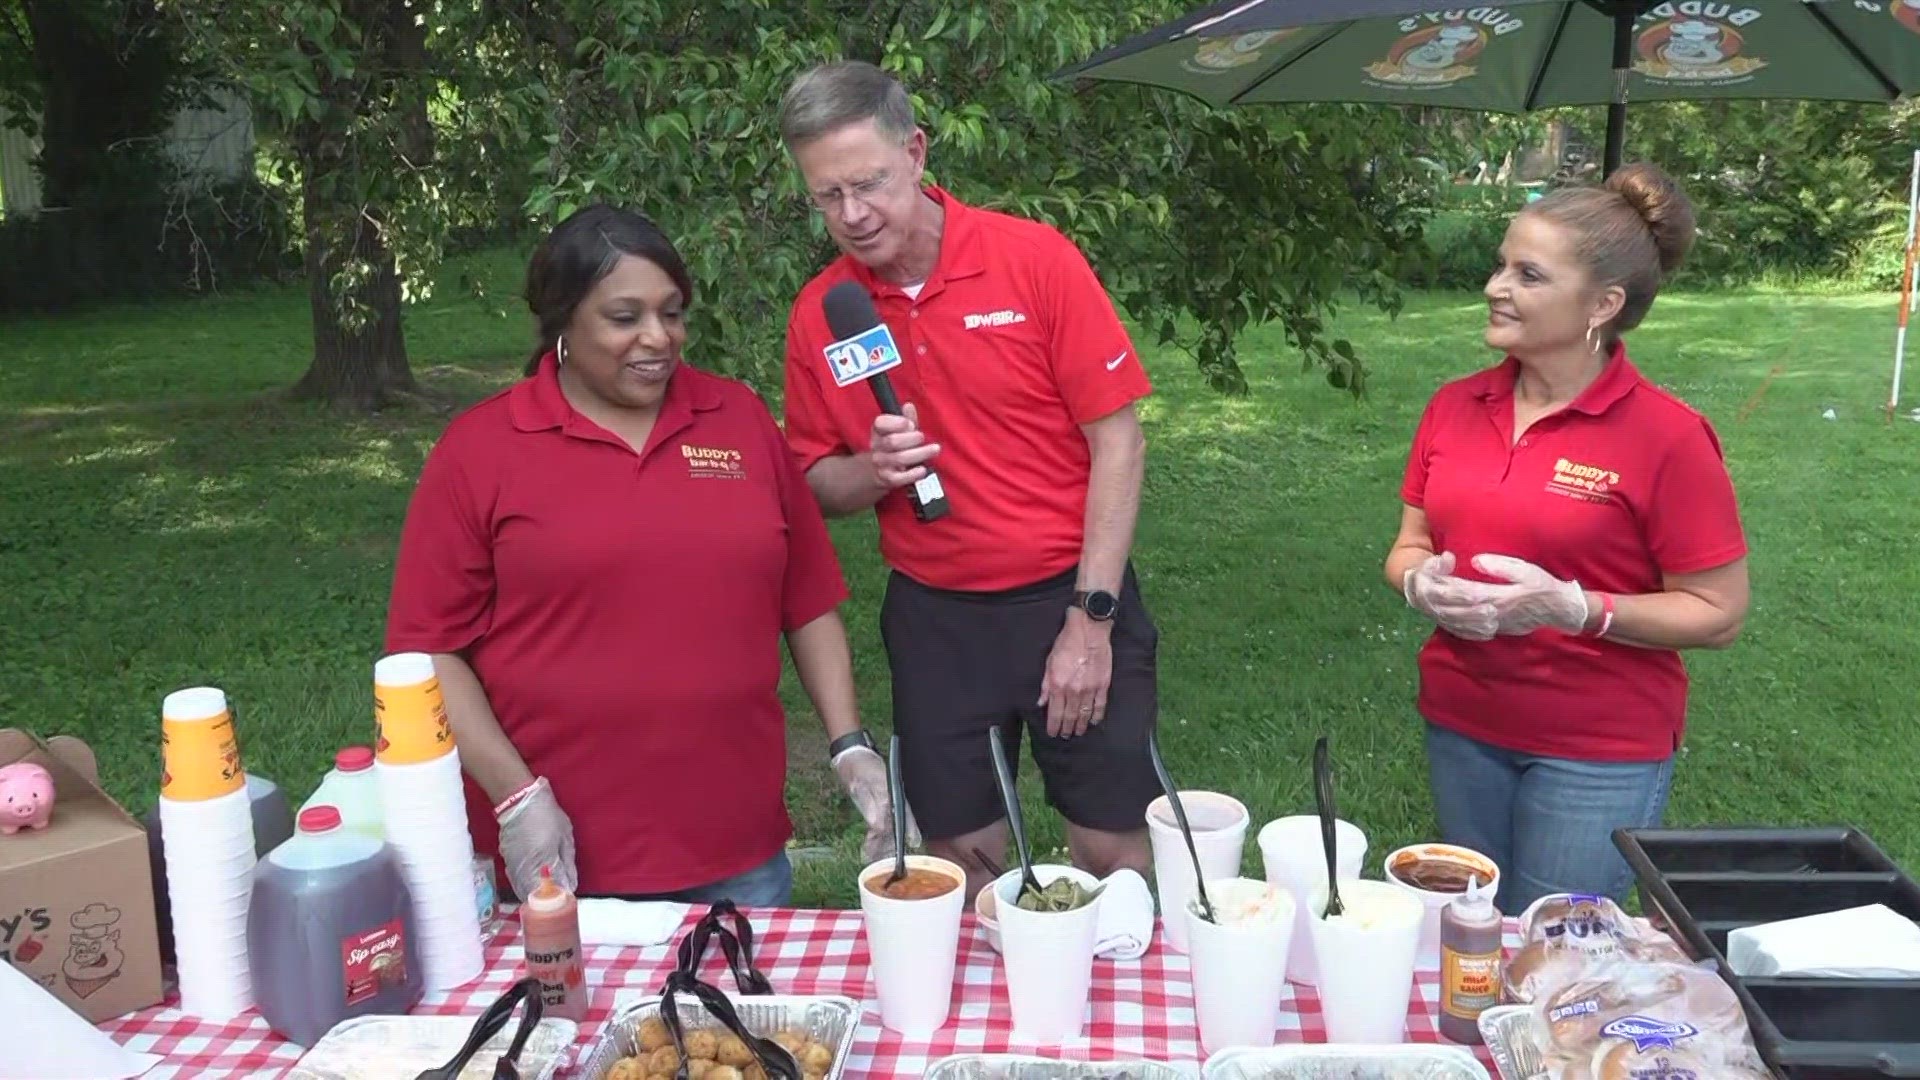 Todd Howell joins Sandy and Sonya from Buddy's BBQ as they get ready for some Backyard BBQ fun.